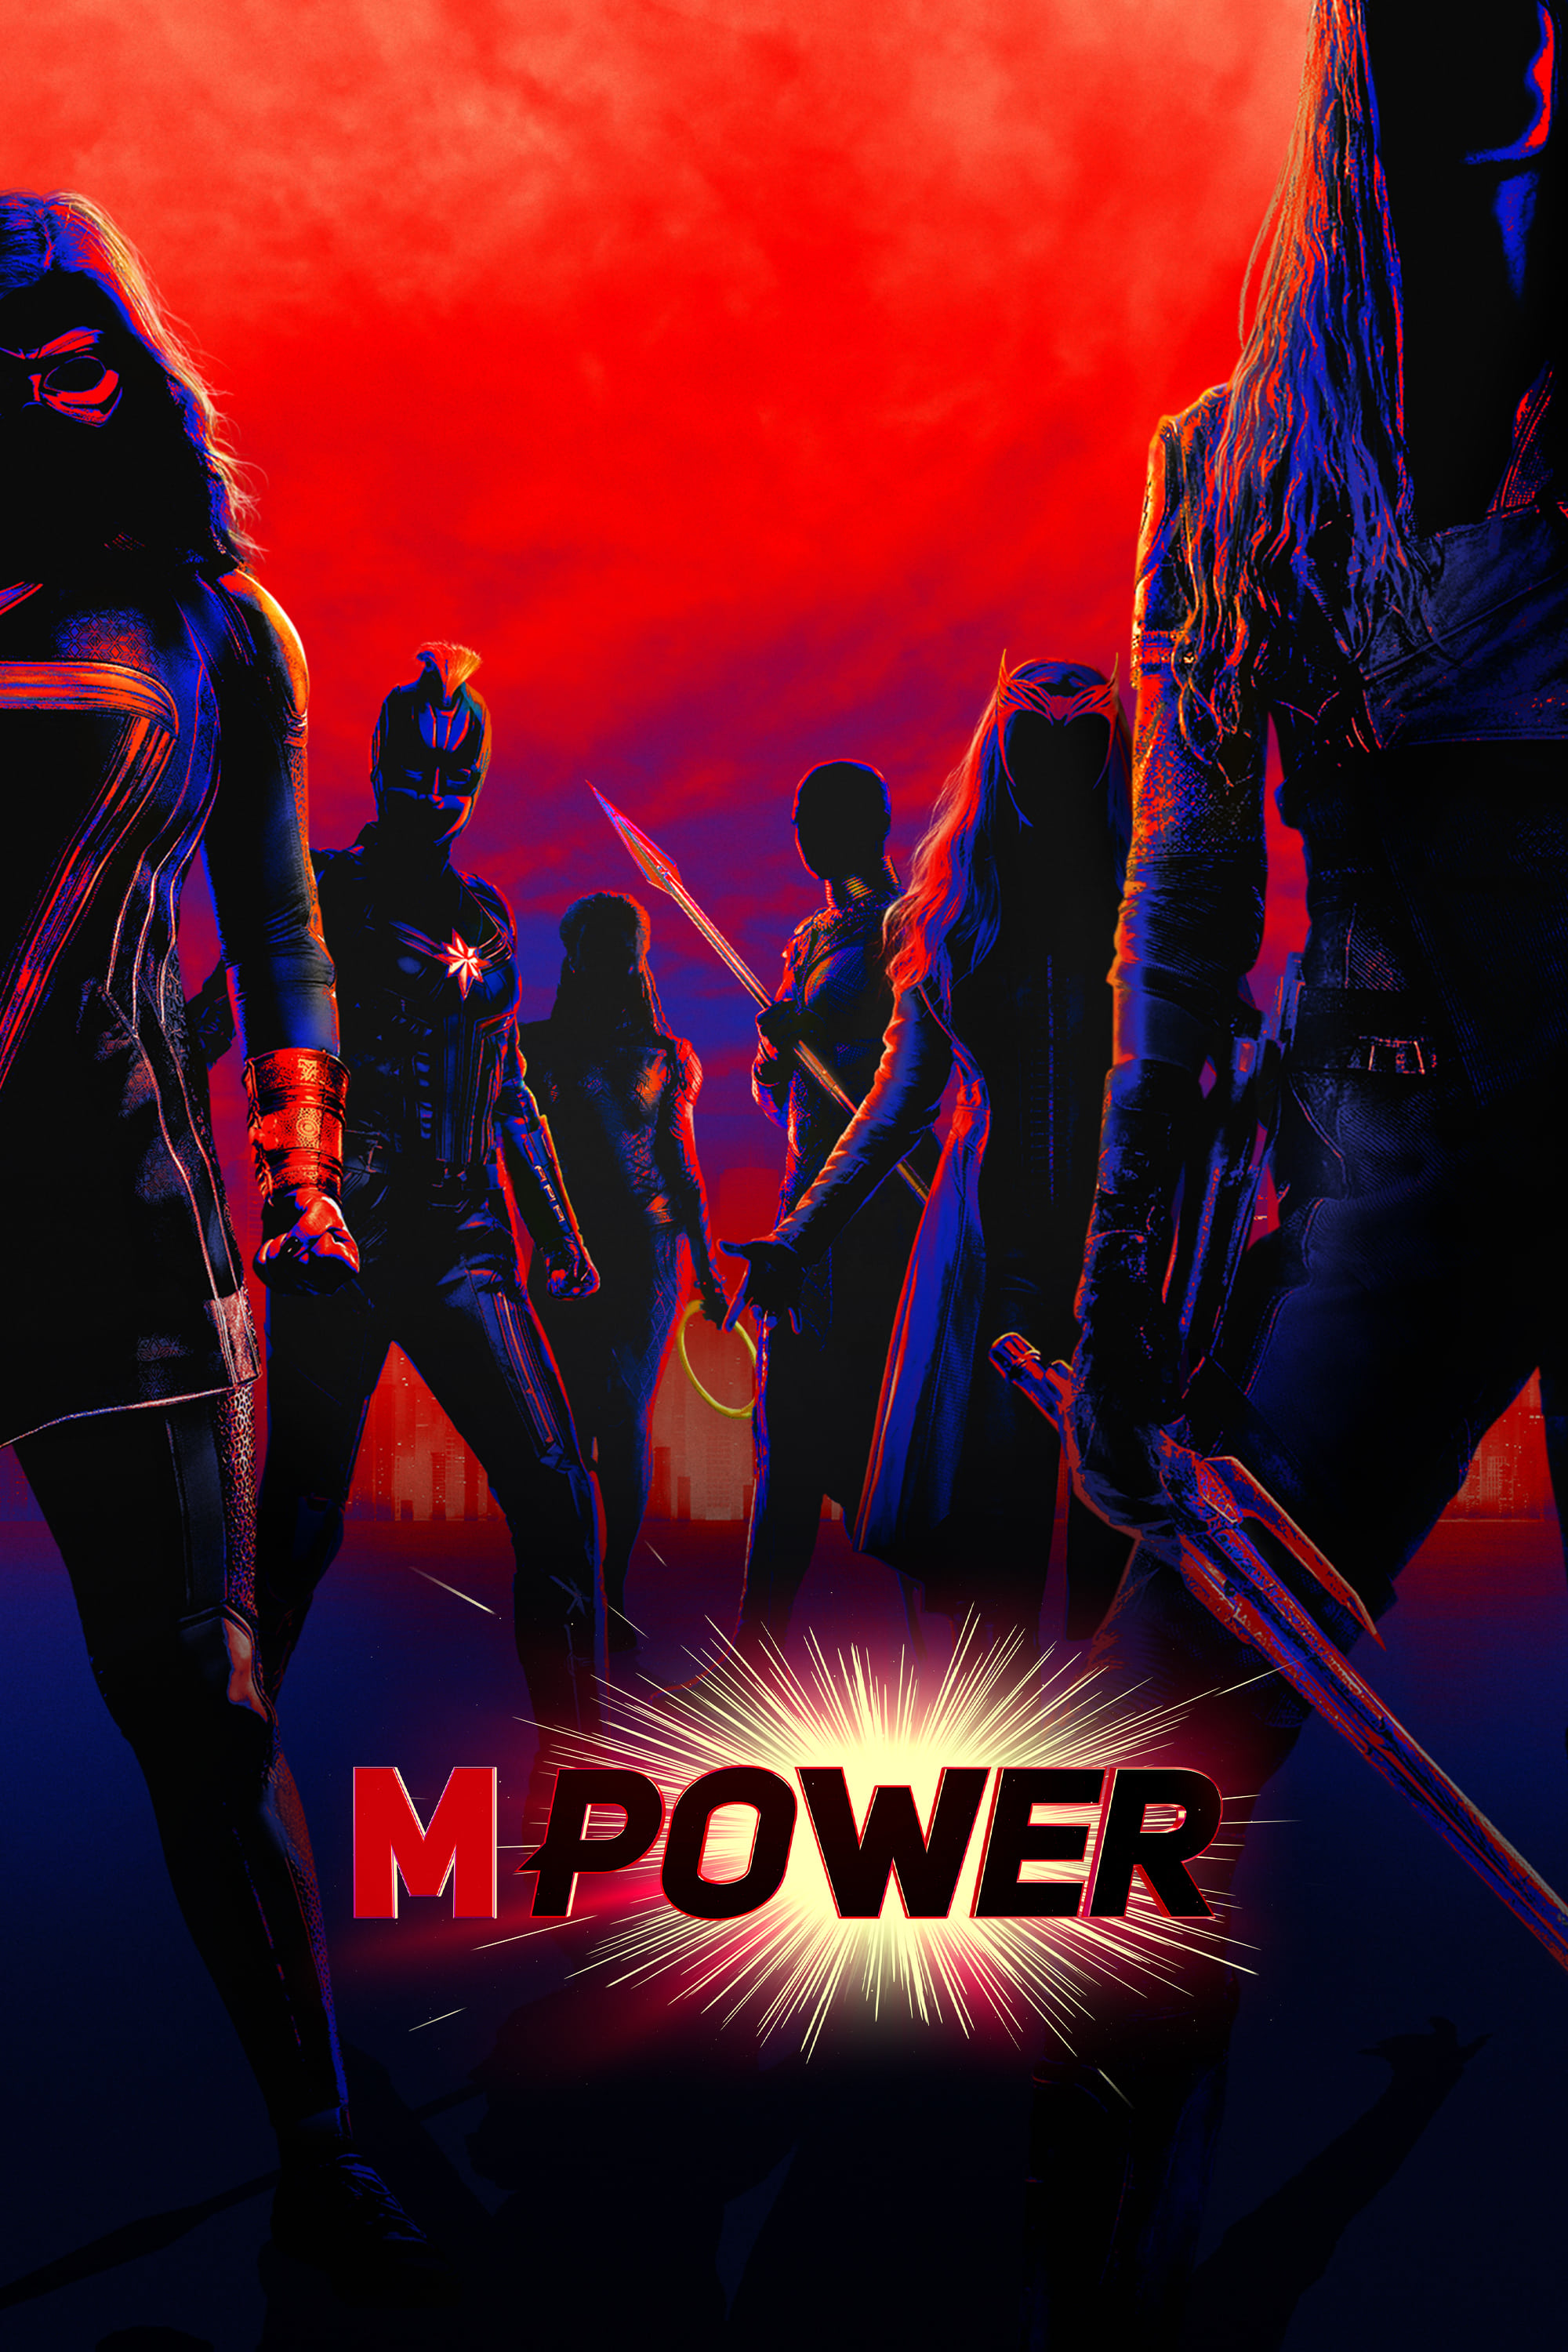 MPower TV Shows About Superhero